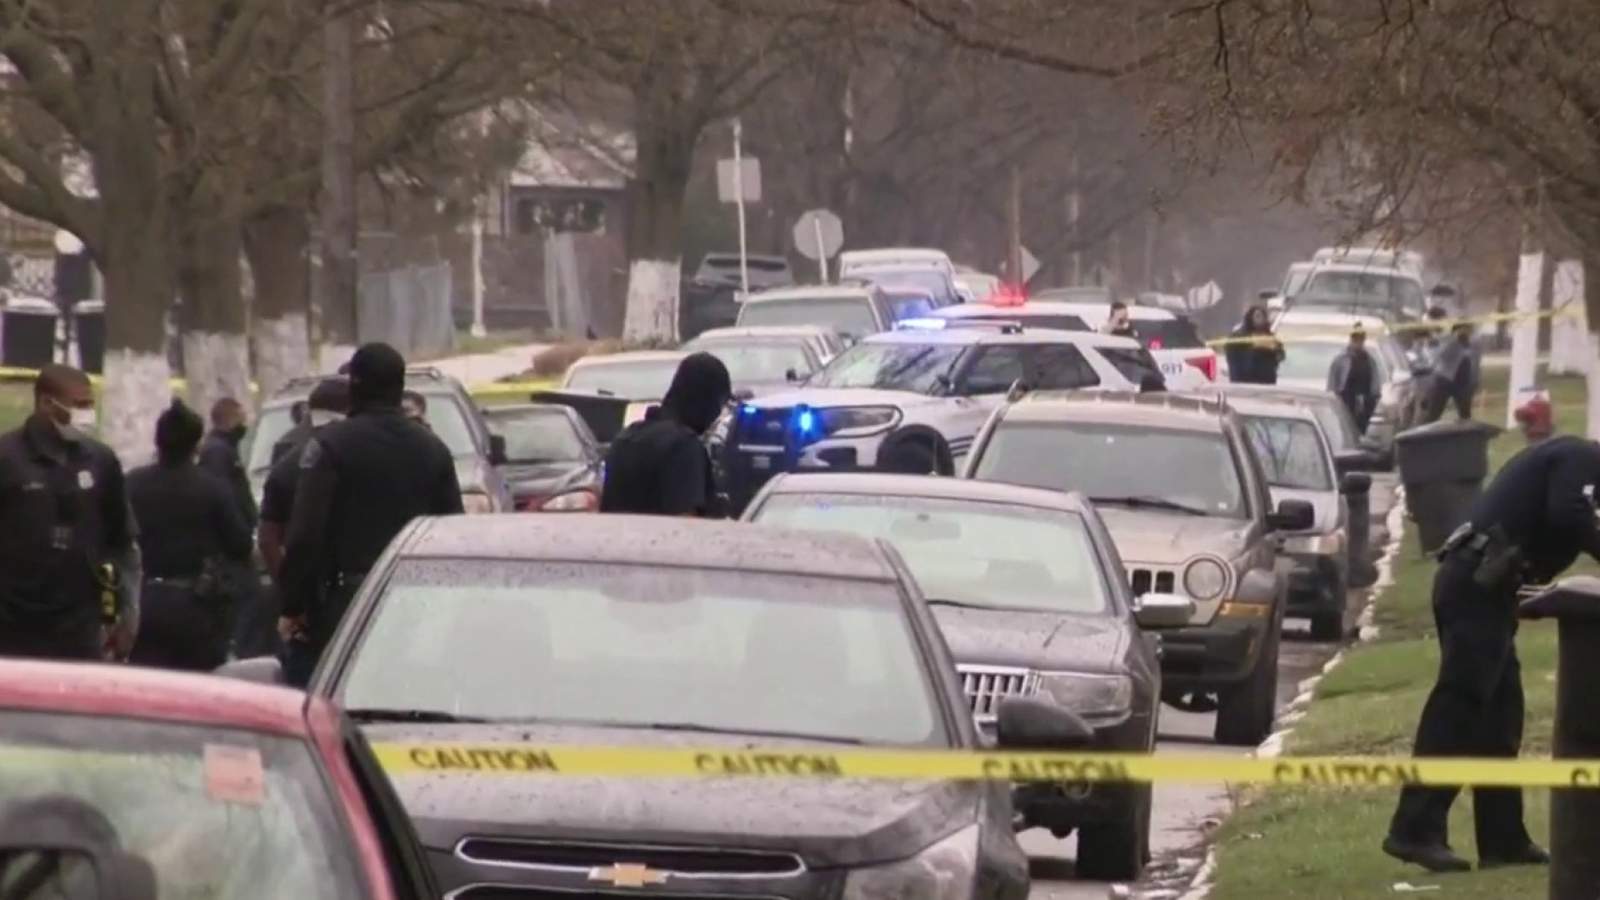 Detroit police search for 19-year-old in connection to triple shooting; 2 people dead